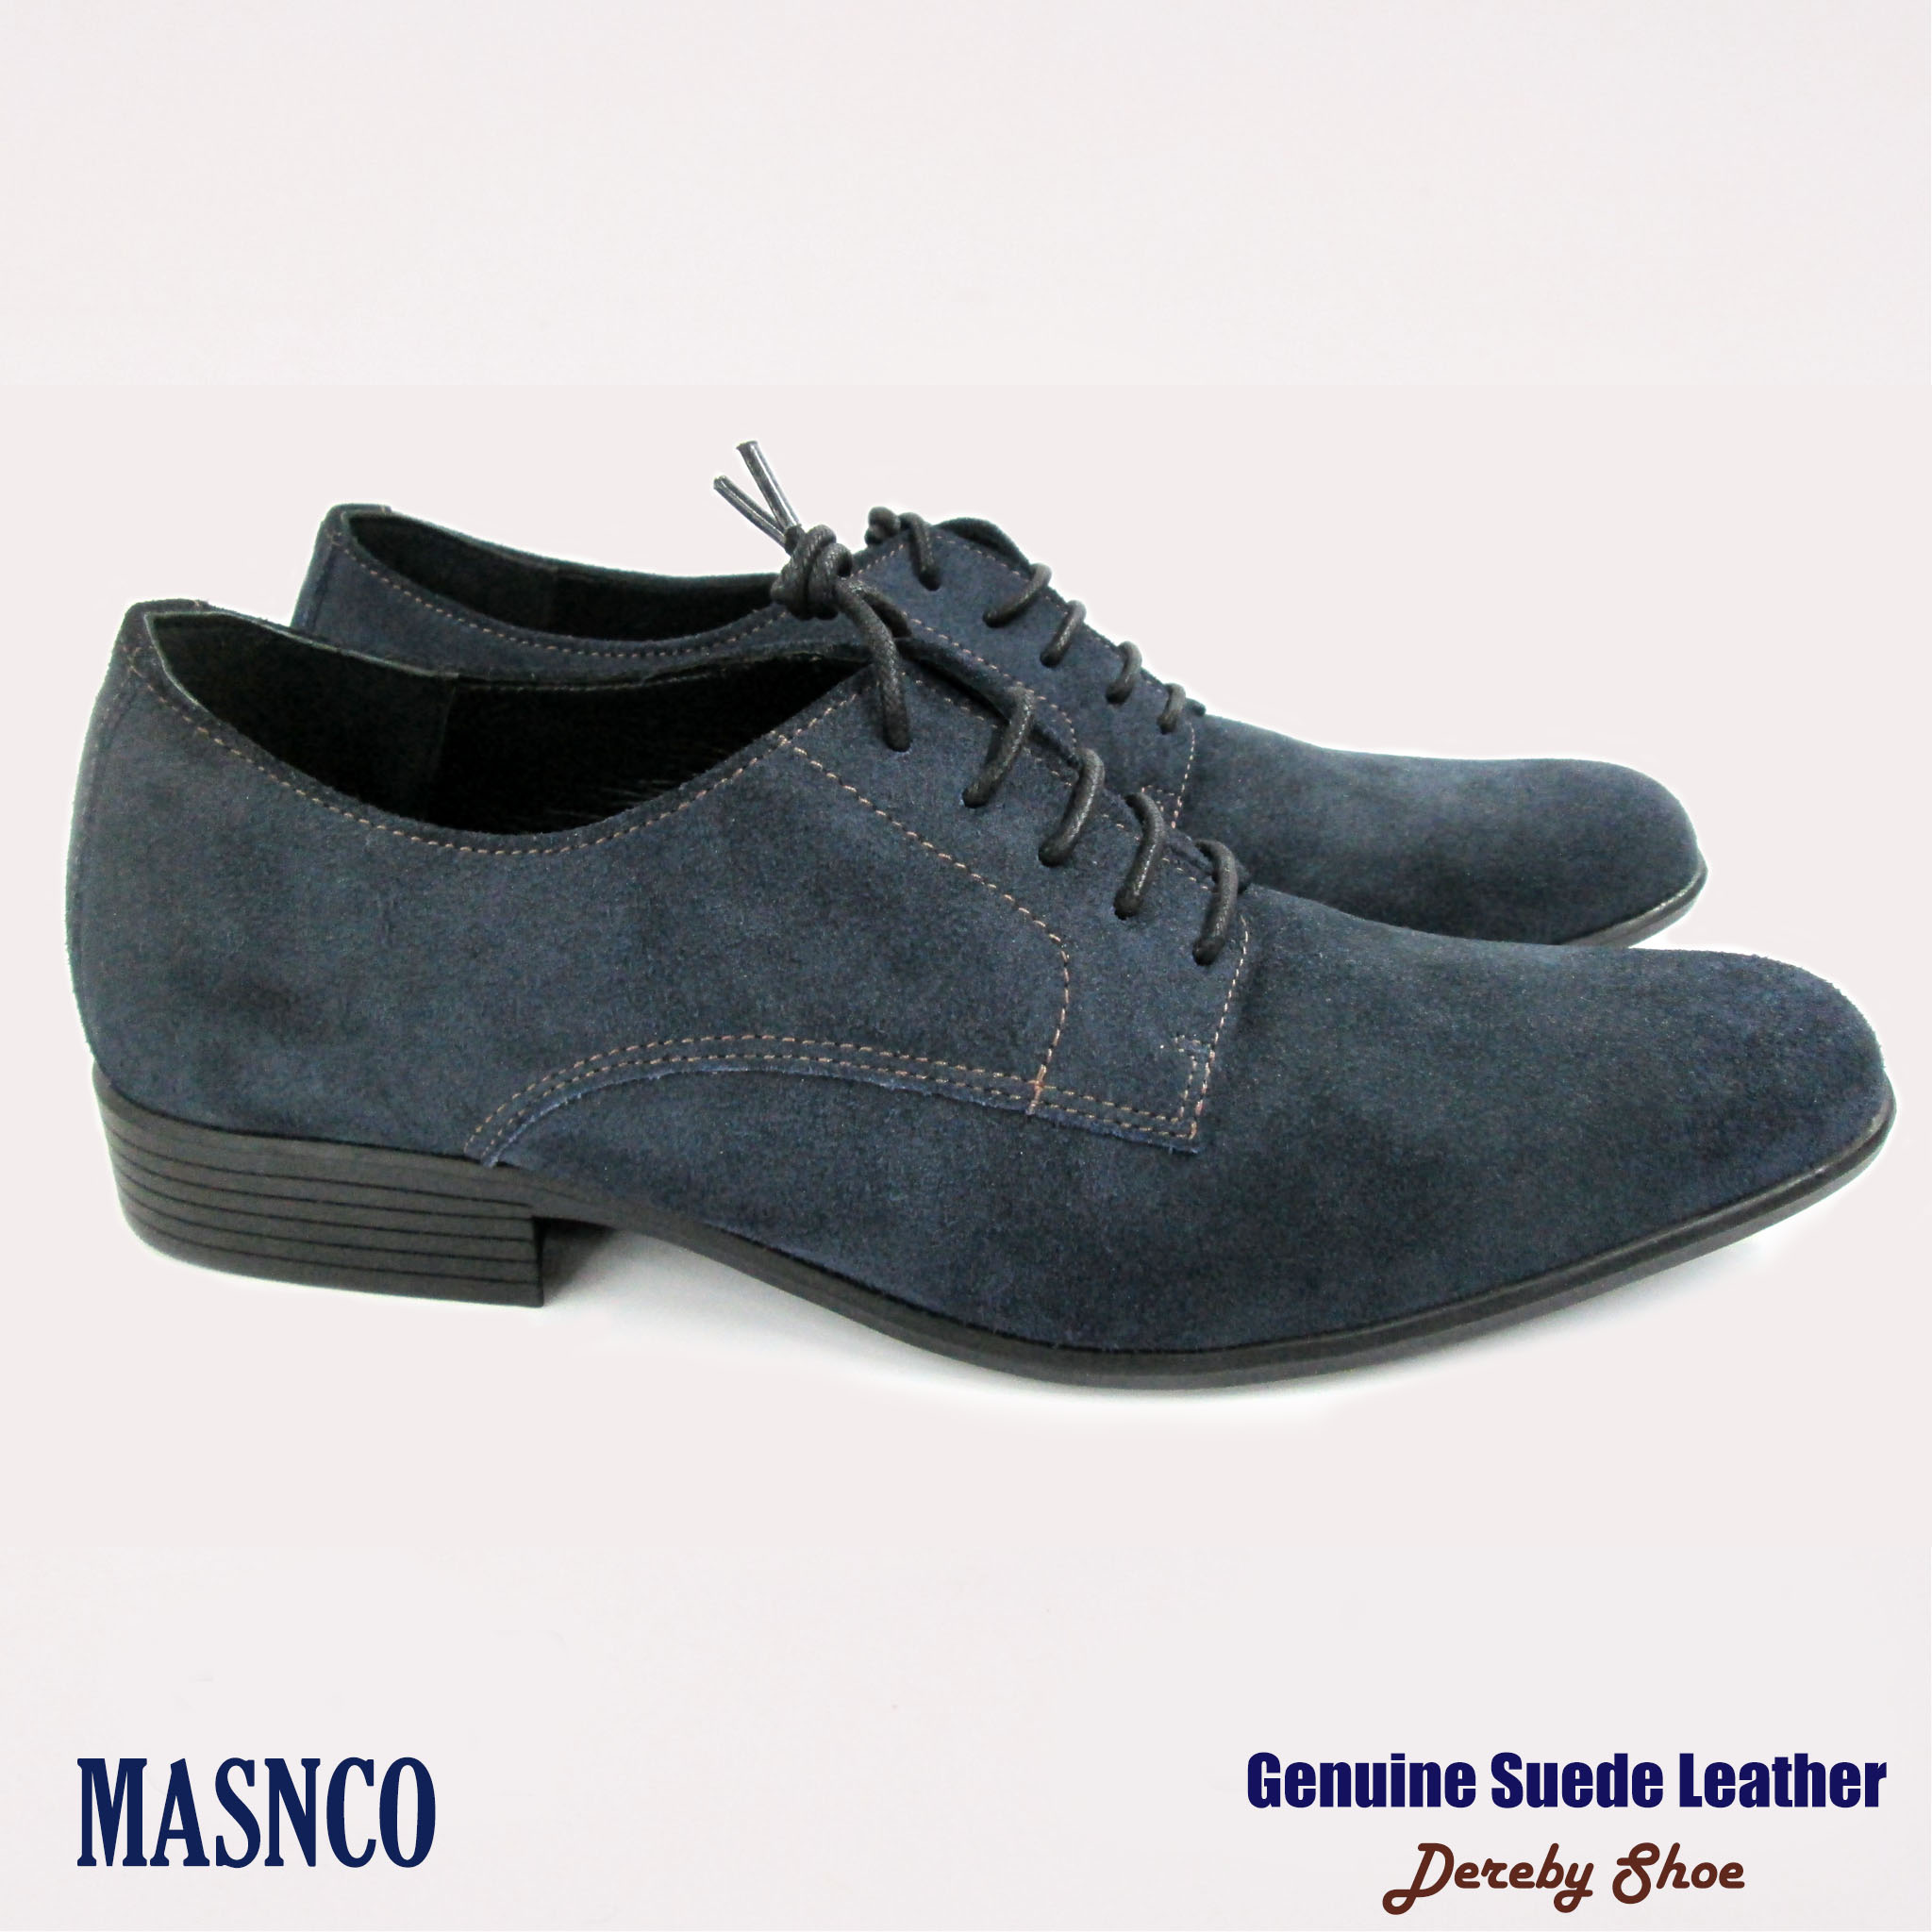 Blue Suede Leather Derby